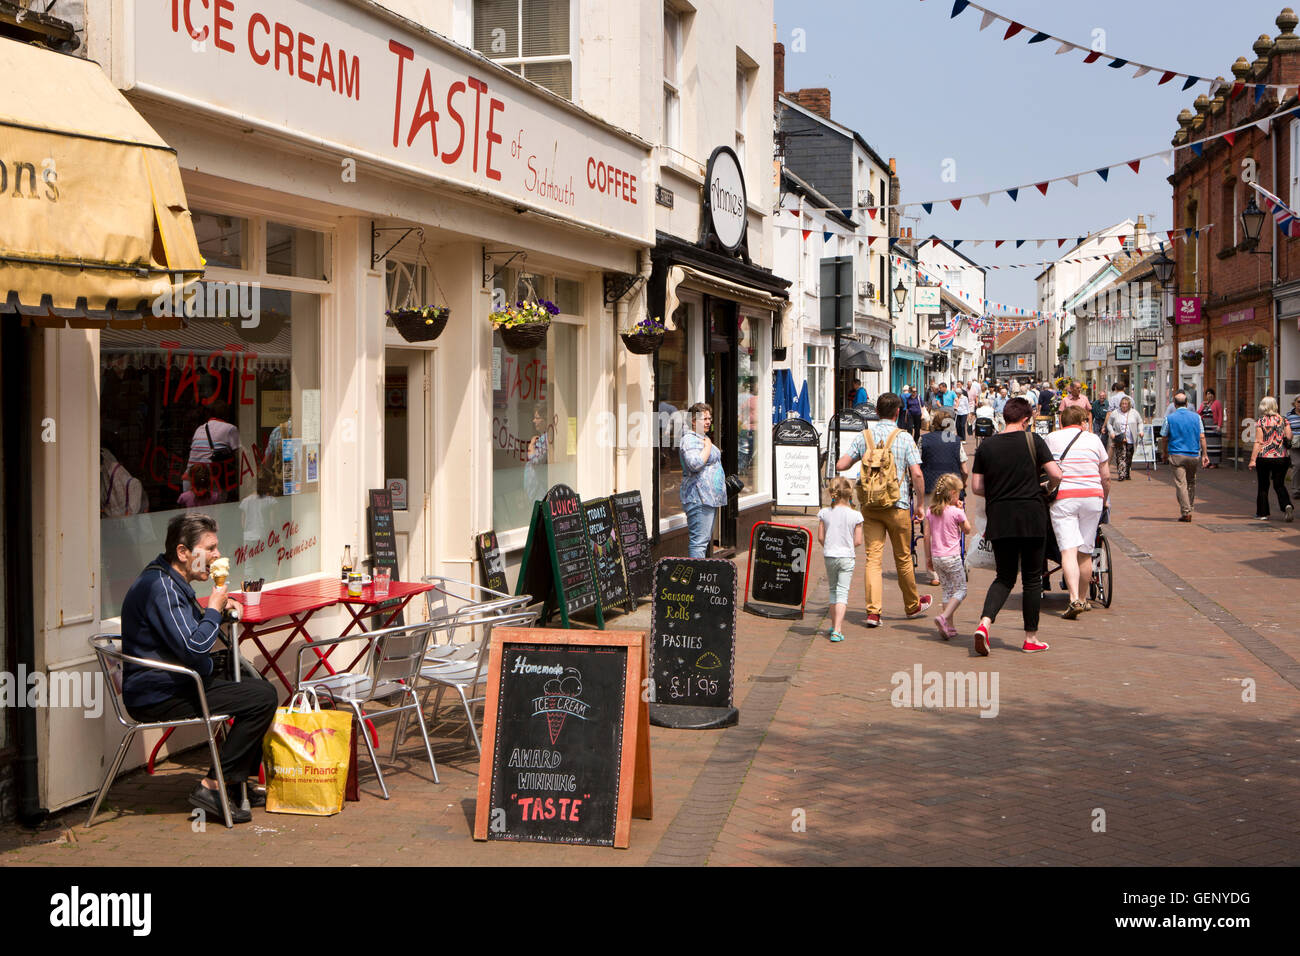 UK, England, Devon, Sidmouth, Old Fore Street, Taste Cafe and ice cream shop Stock Photo